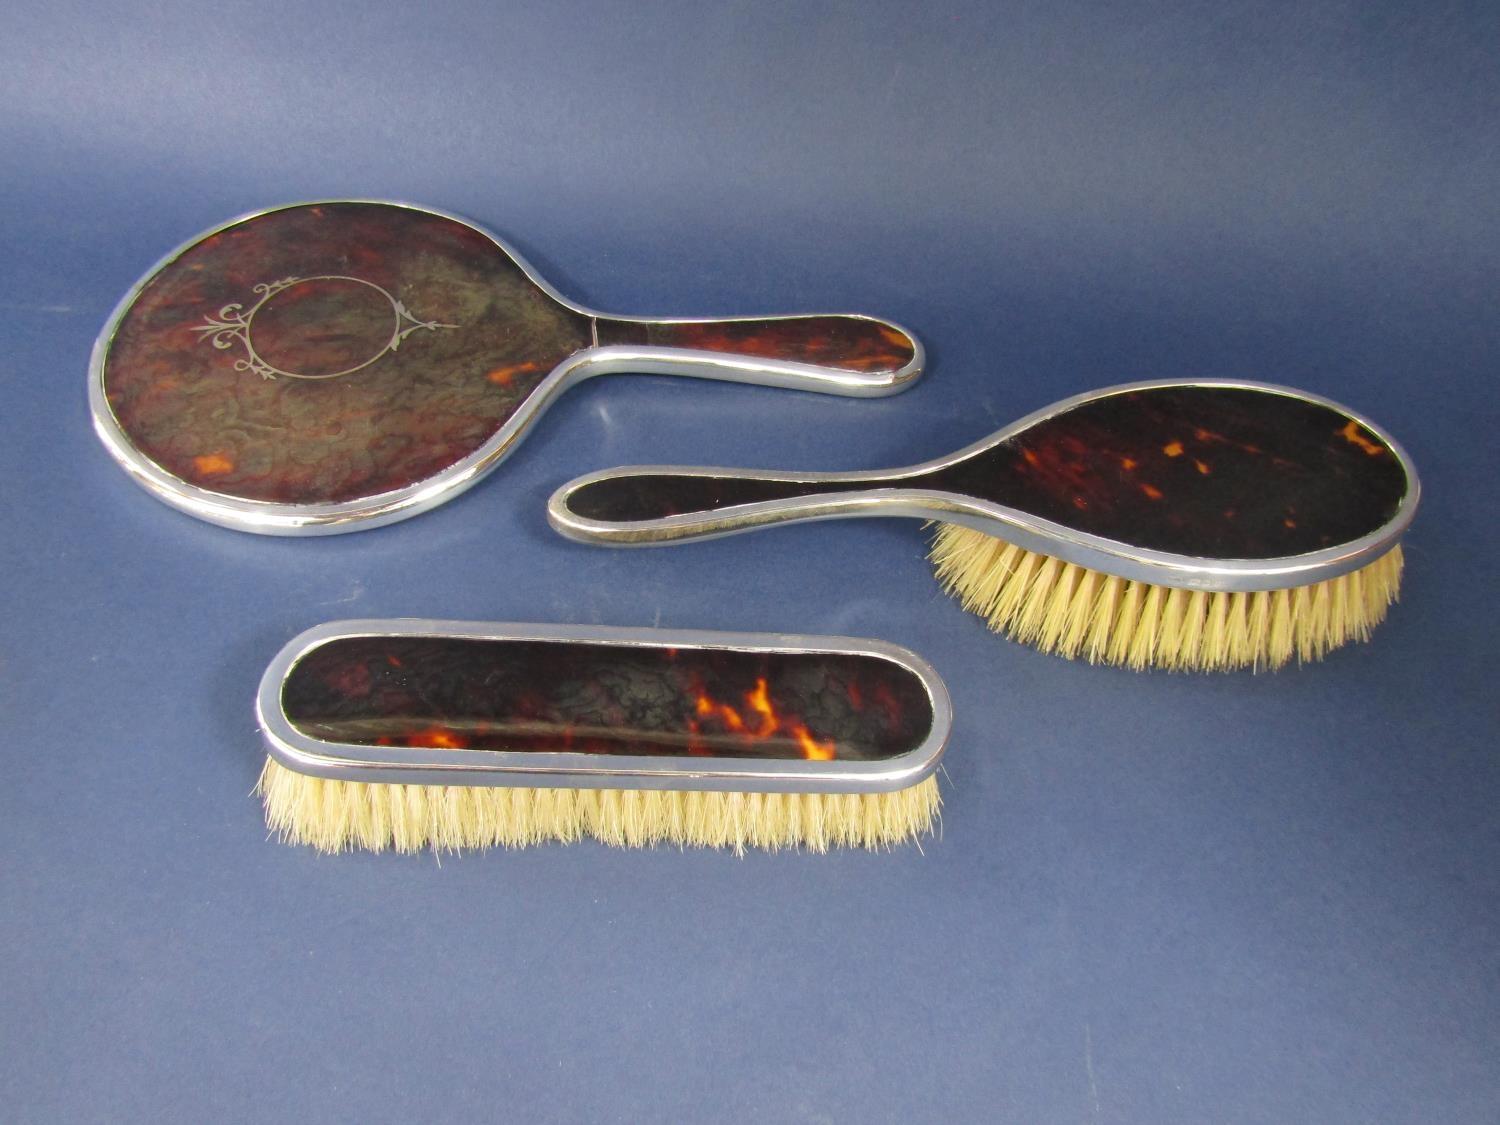 Matched three piece silver and tortoiseshell dressing set comprising mirror and two brushes (3)